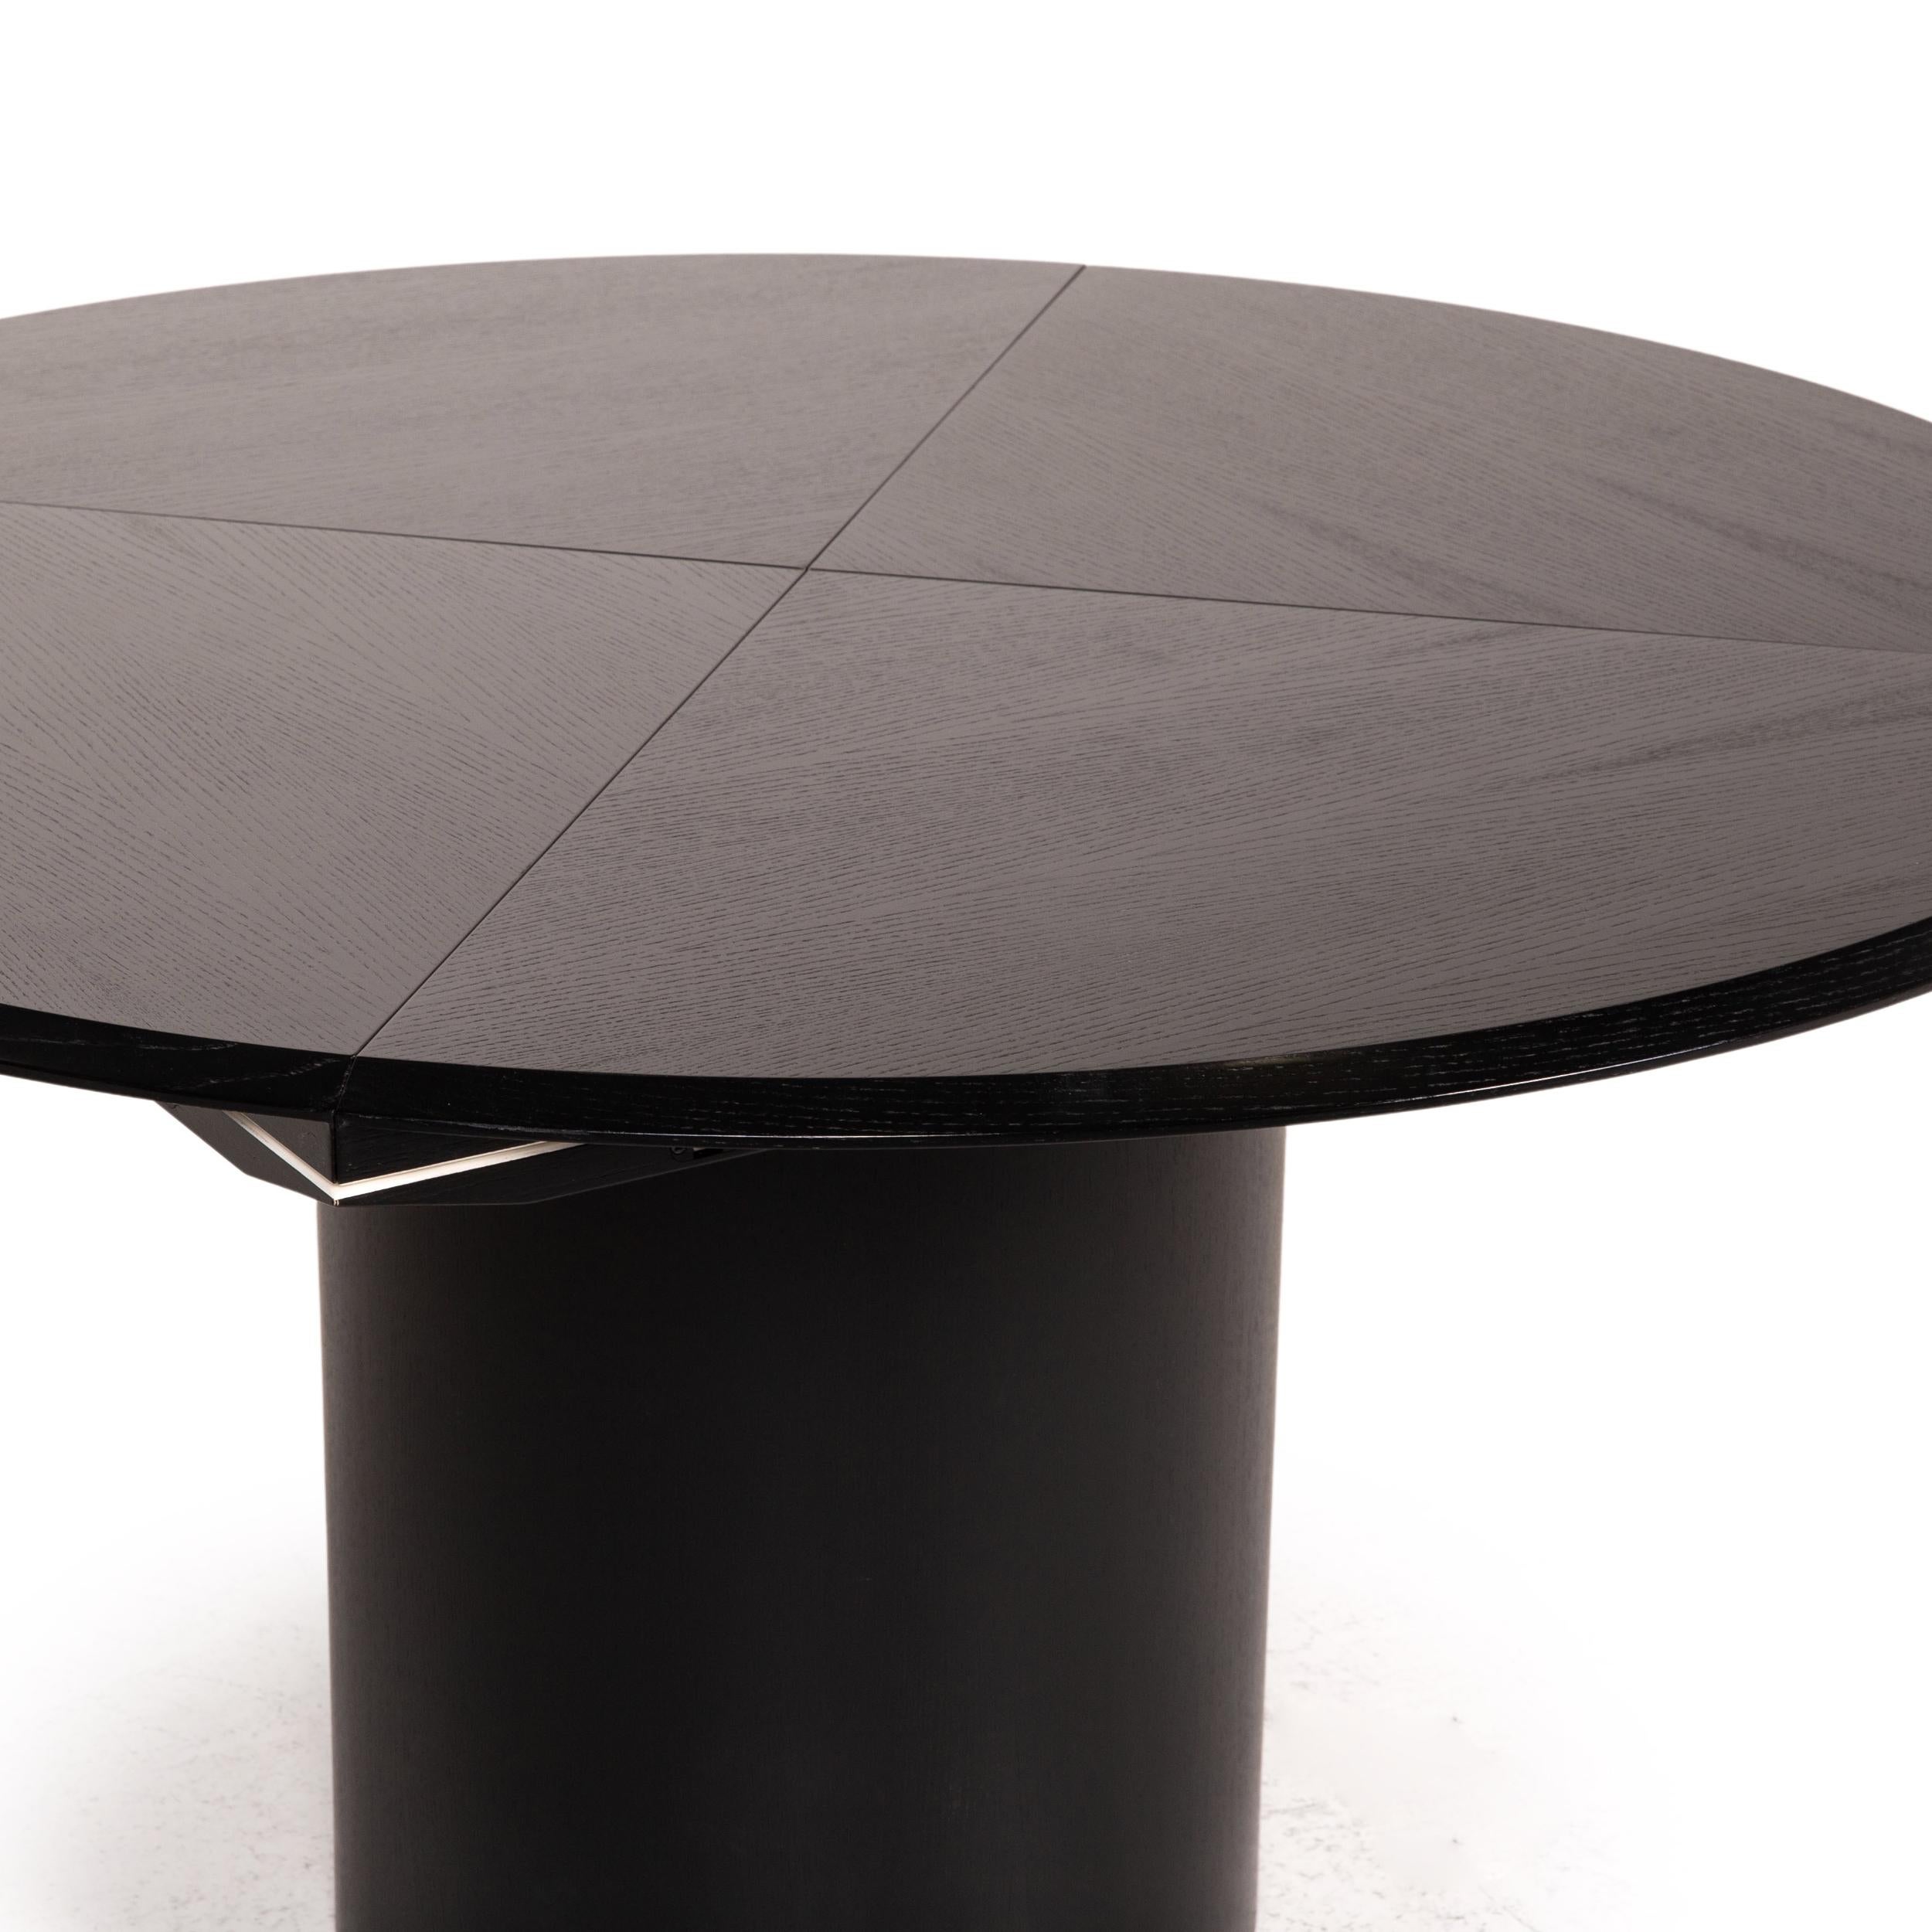 Modern Rosenthal Quadrondo Dining Table Round Black and White Foldable Function Square